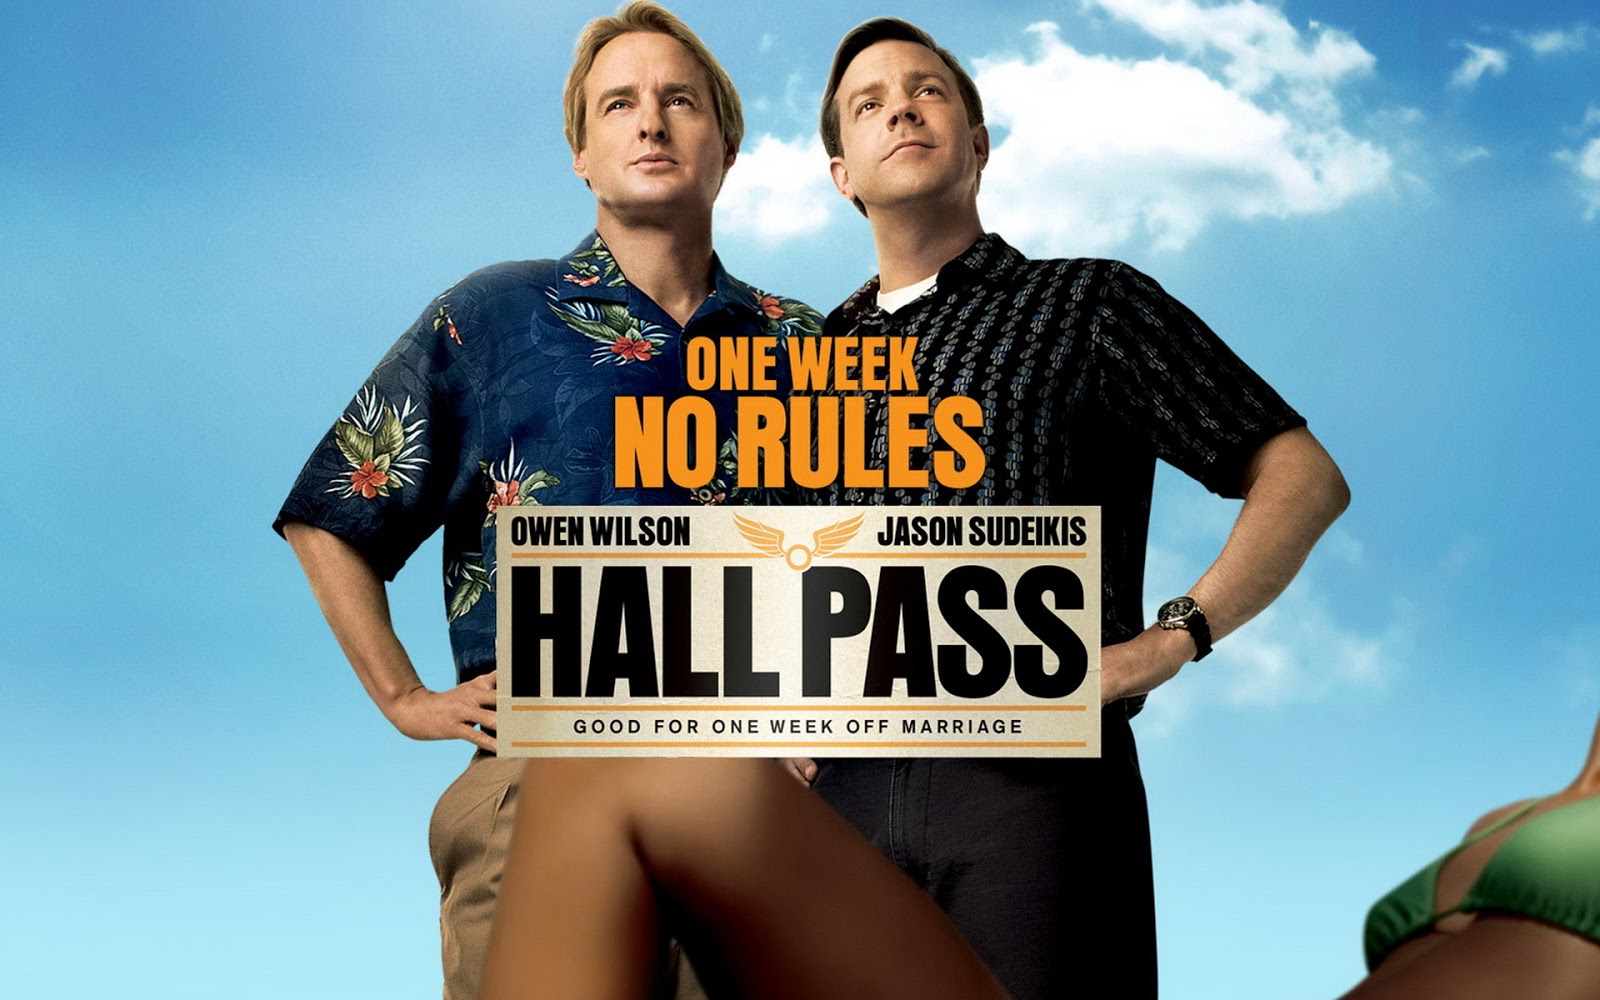 Hall pass meaning marriage